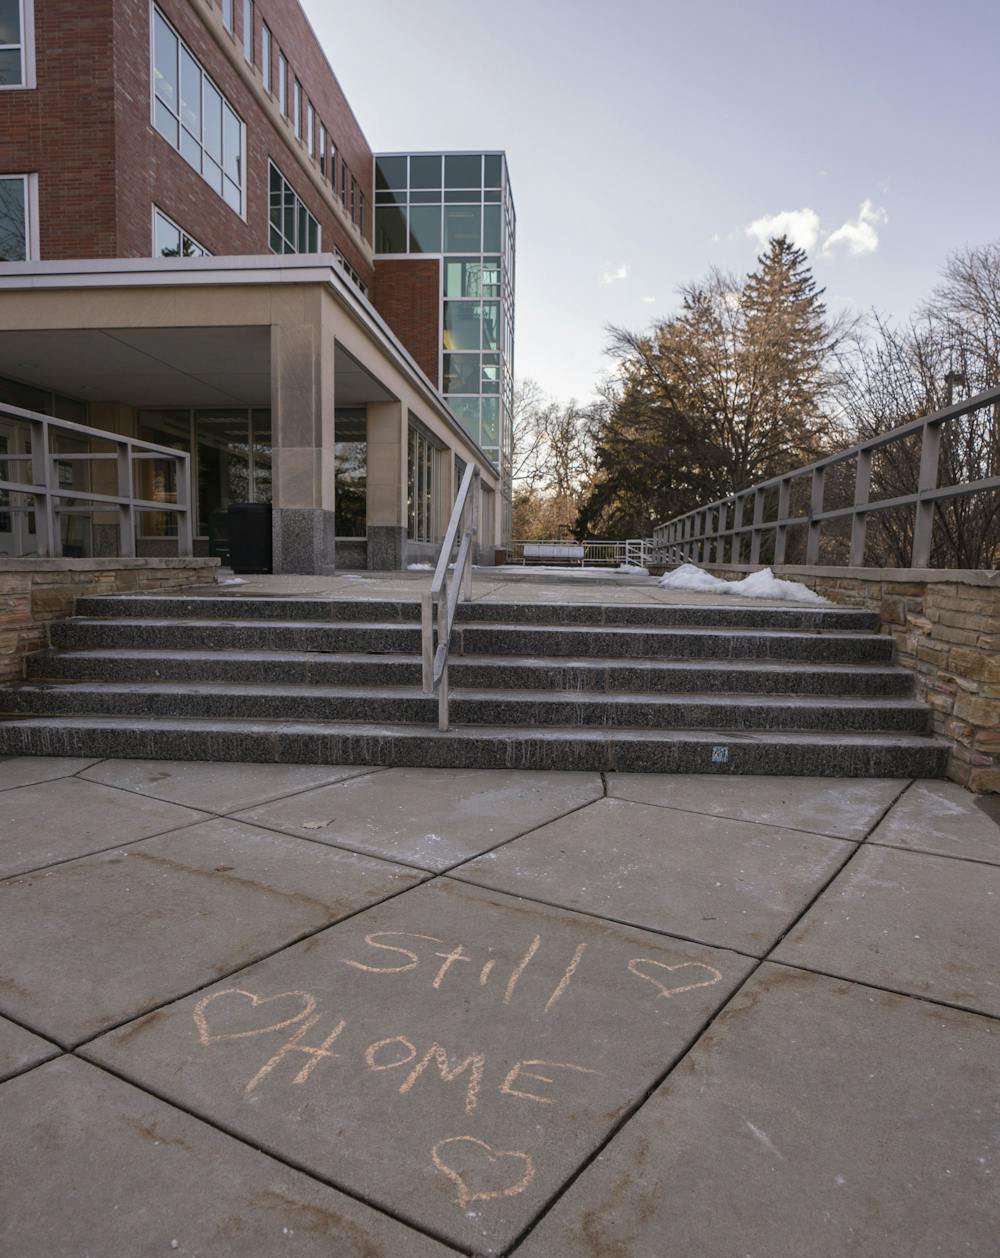 <p>A chalk message outside of the library reads “Still Home” on Sunday, Feb. 19, 2023, for Spartan Sunday - an event organized by alumni and Spartan parents to welcome students and faculty back to campus.</p>